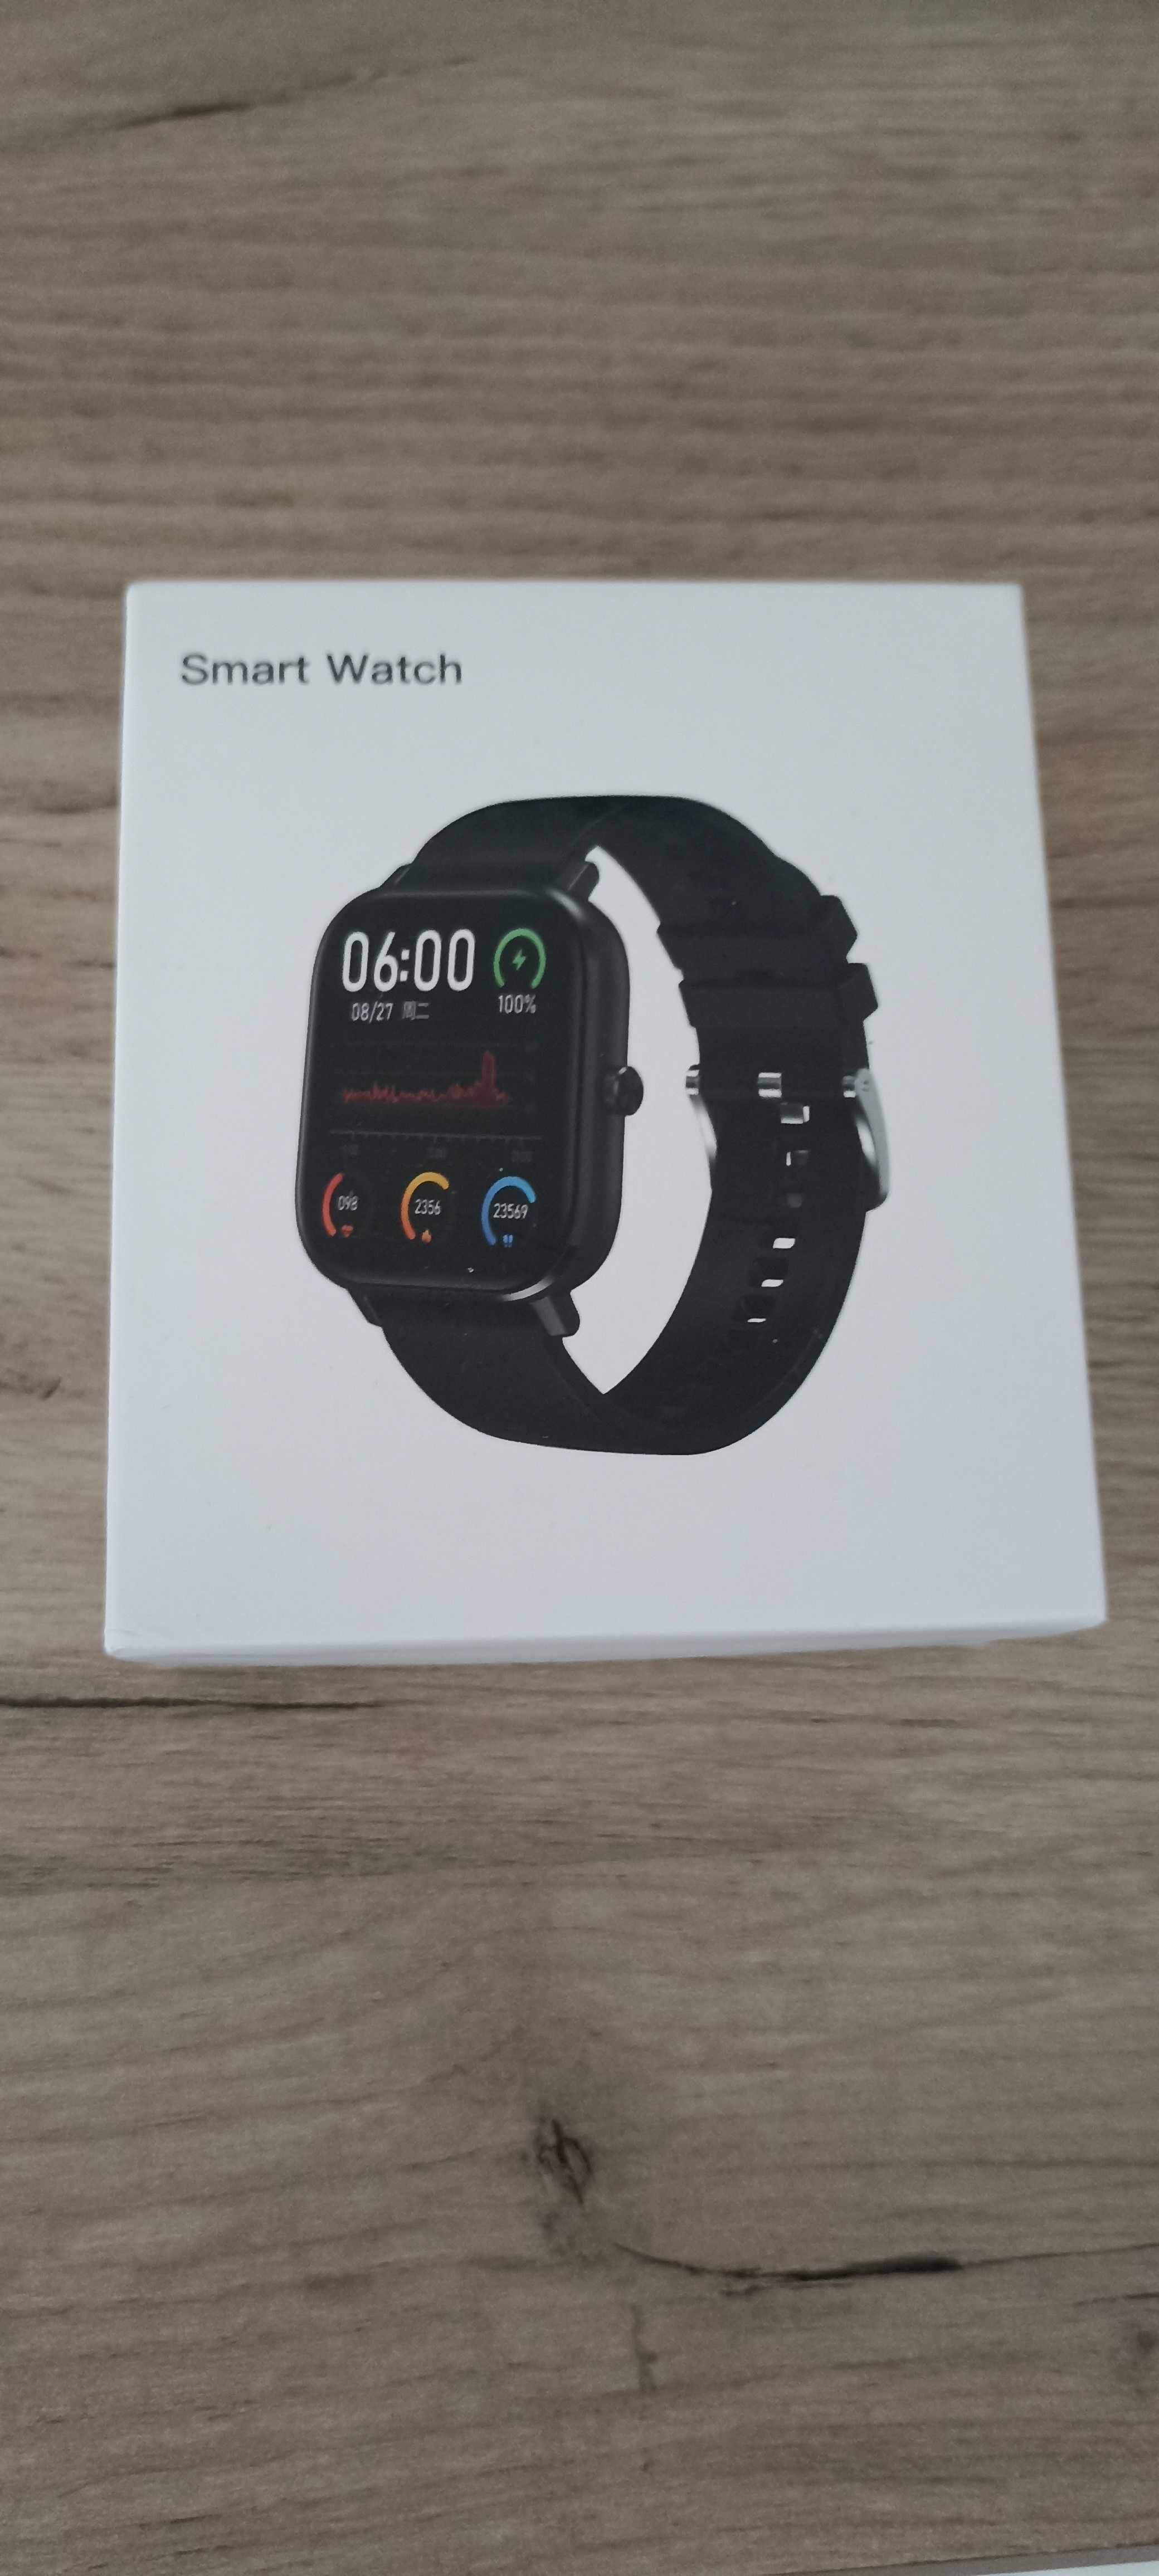 Smart Watch Android